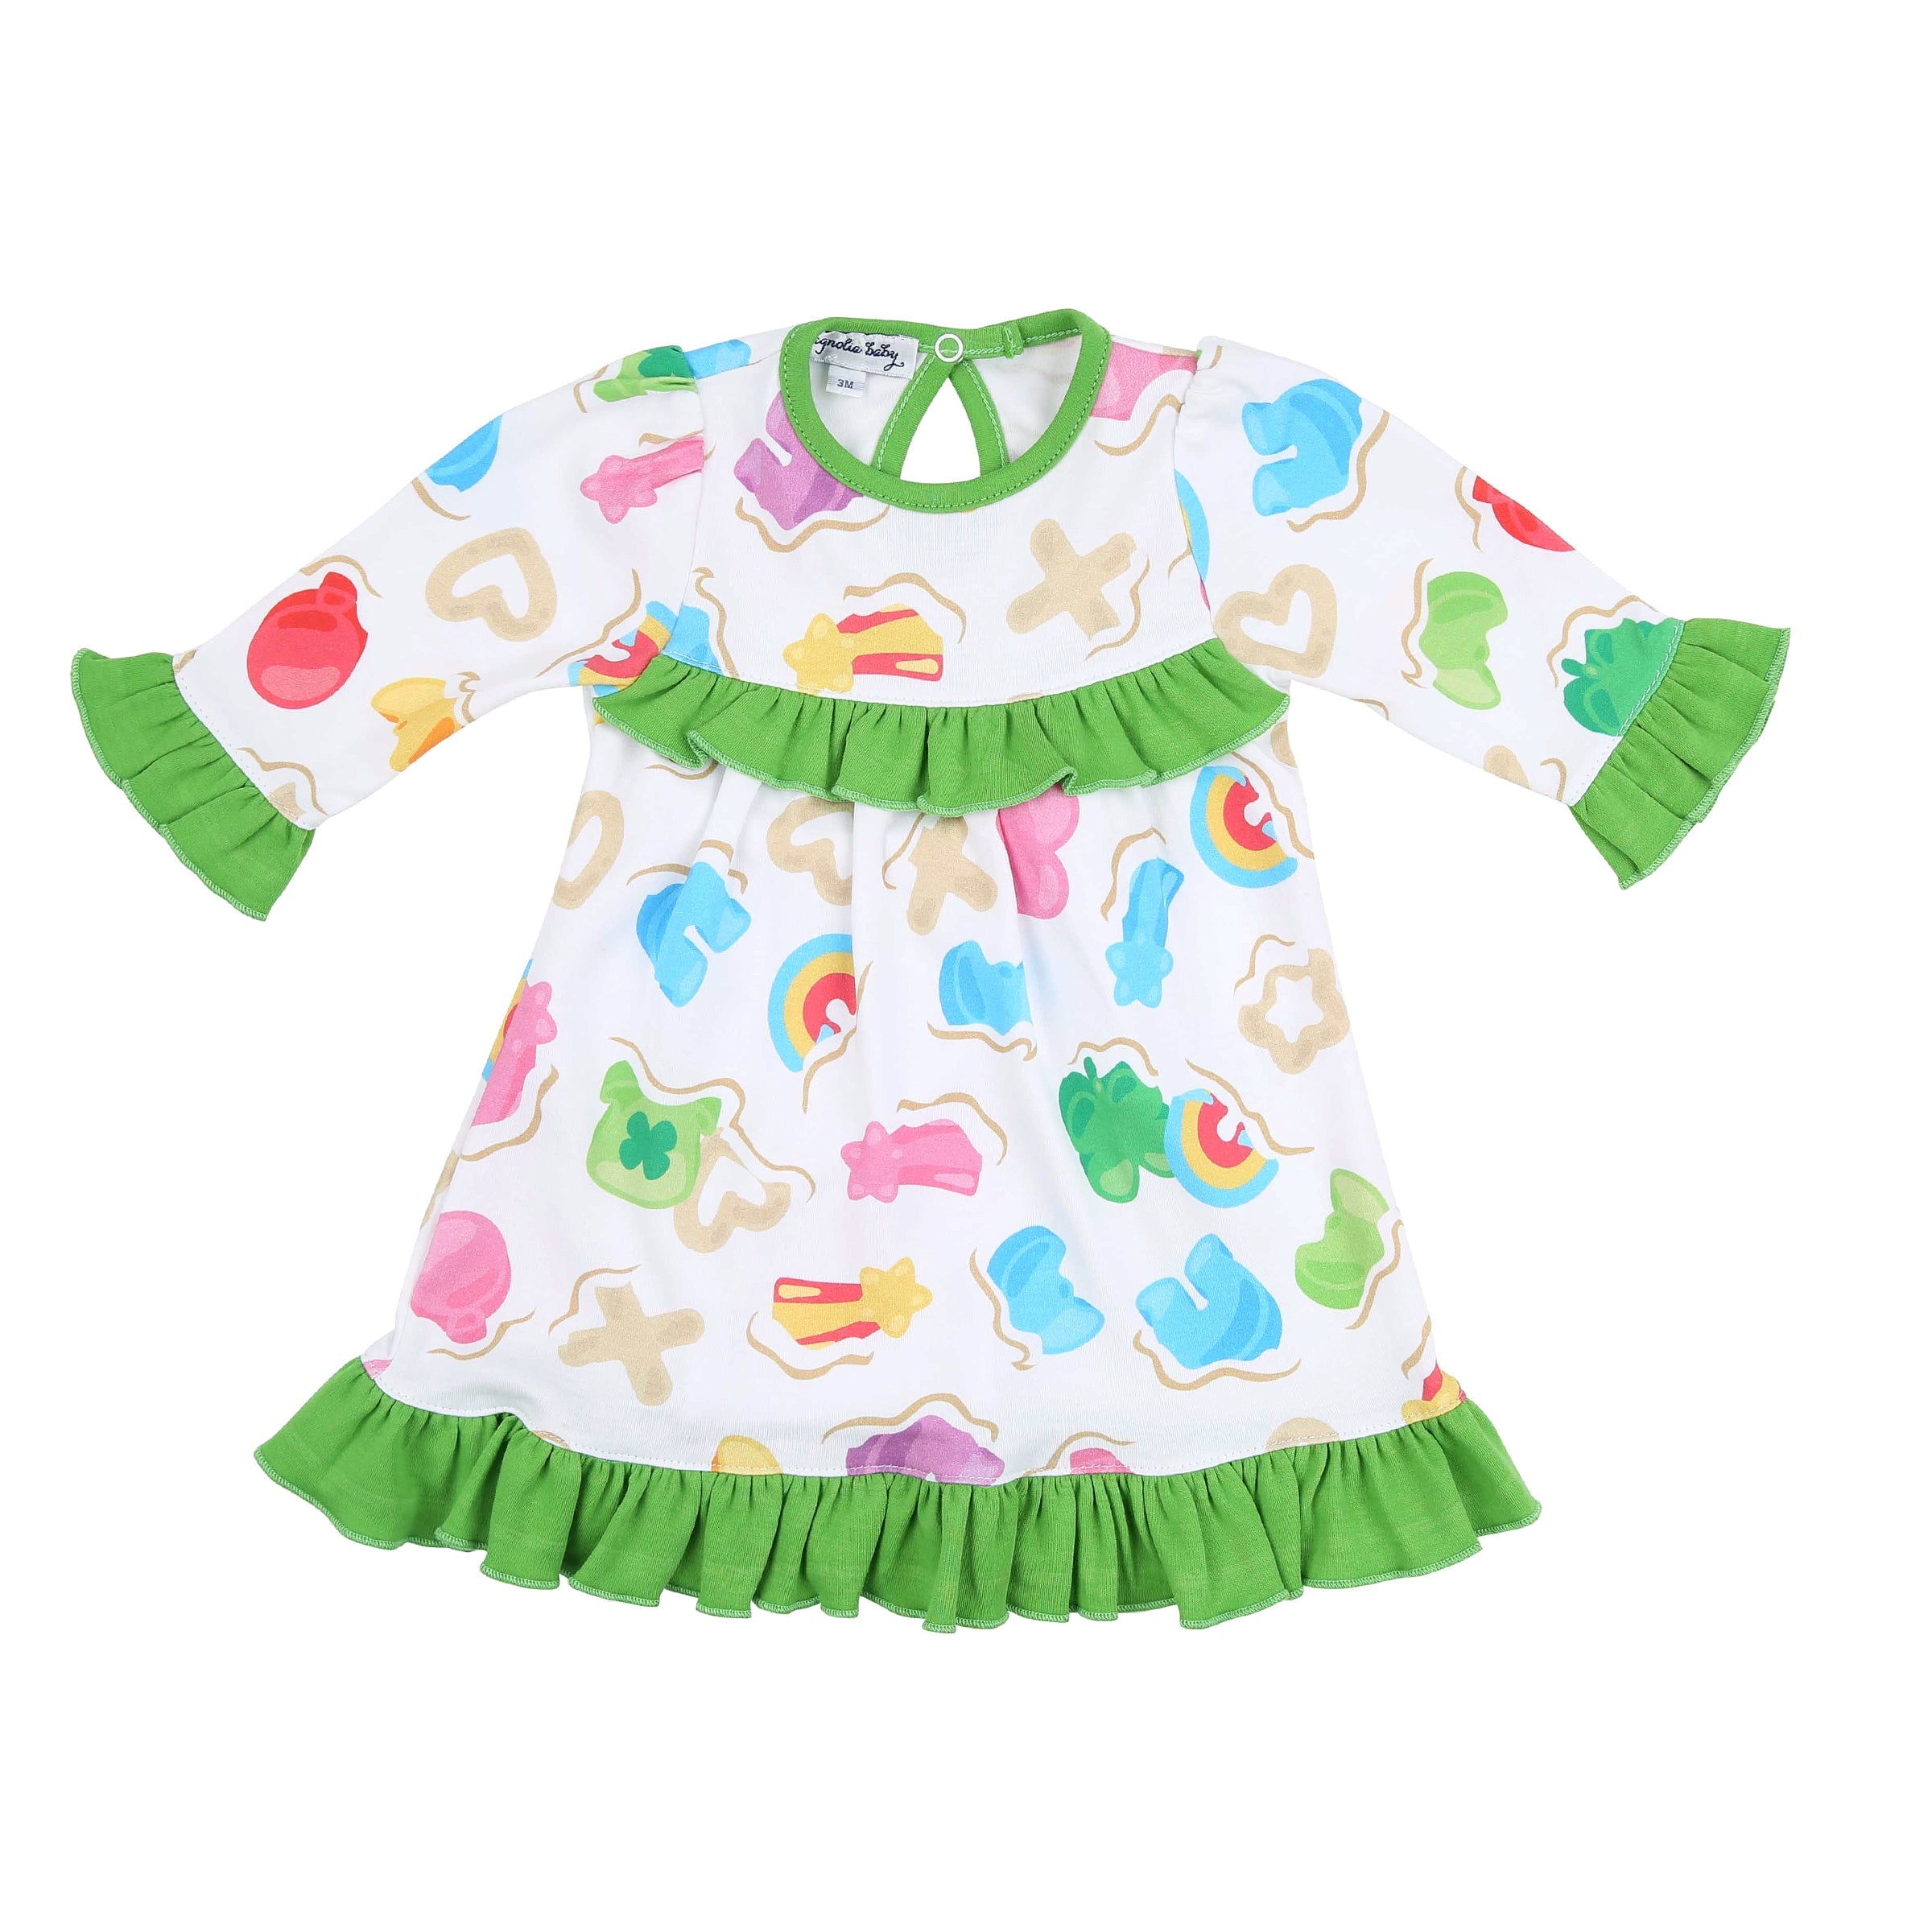 My Lucky Charm Dress + Diaper Cover